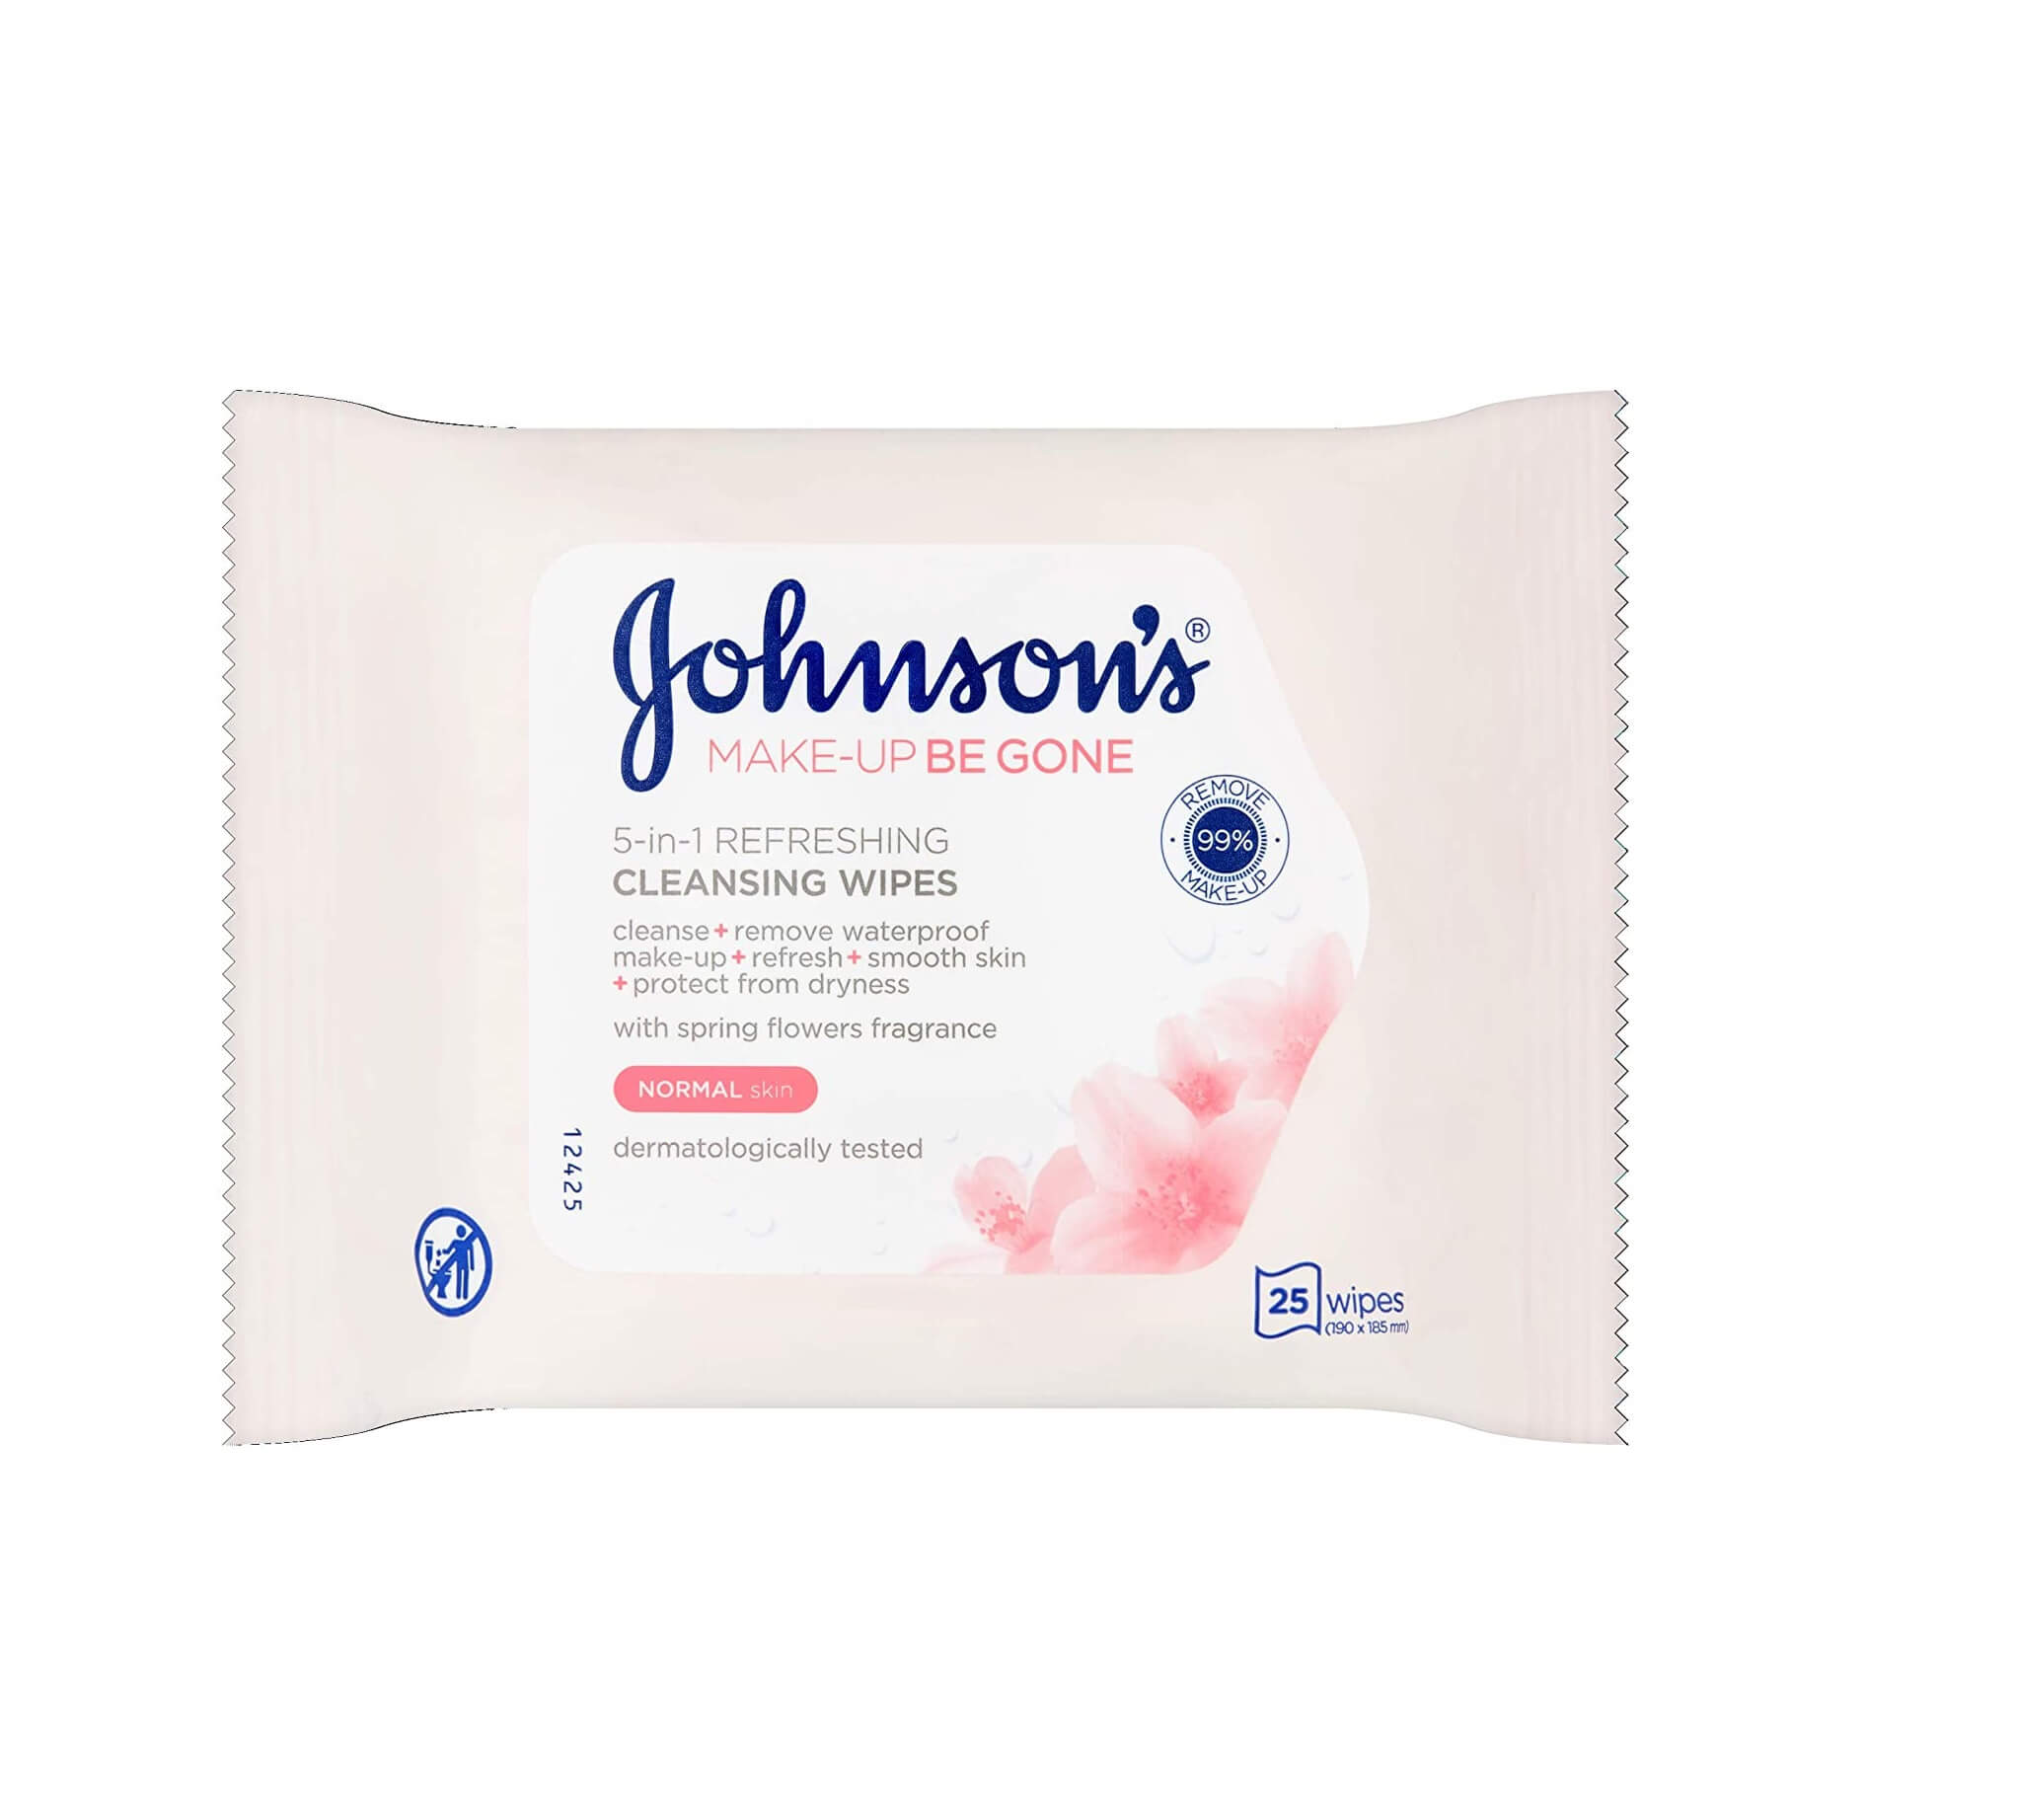 Johnson's Face Care Makeup Be Gone Refreshing Wipes